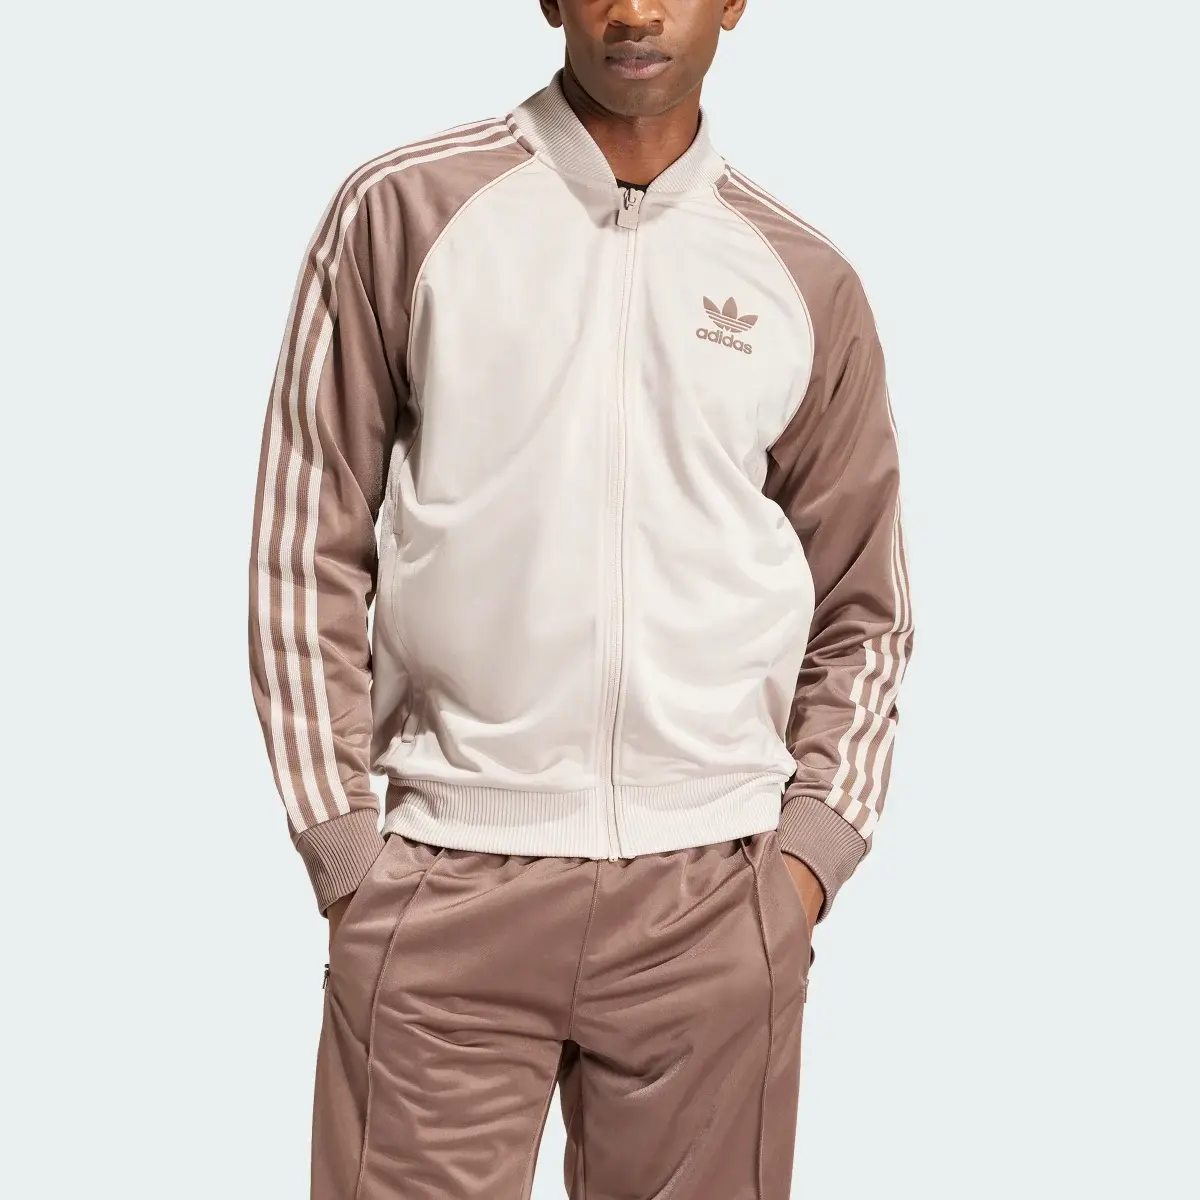 Adidas Track top SST. 1